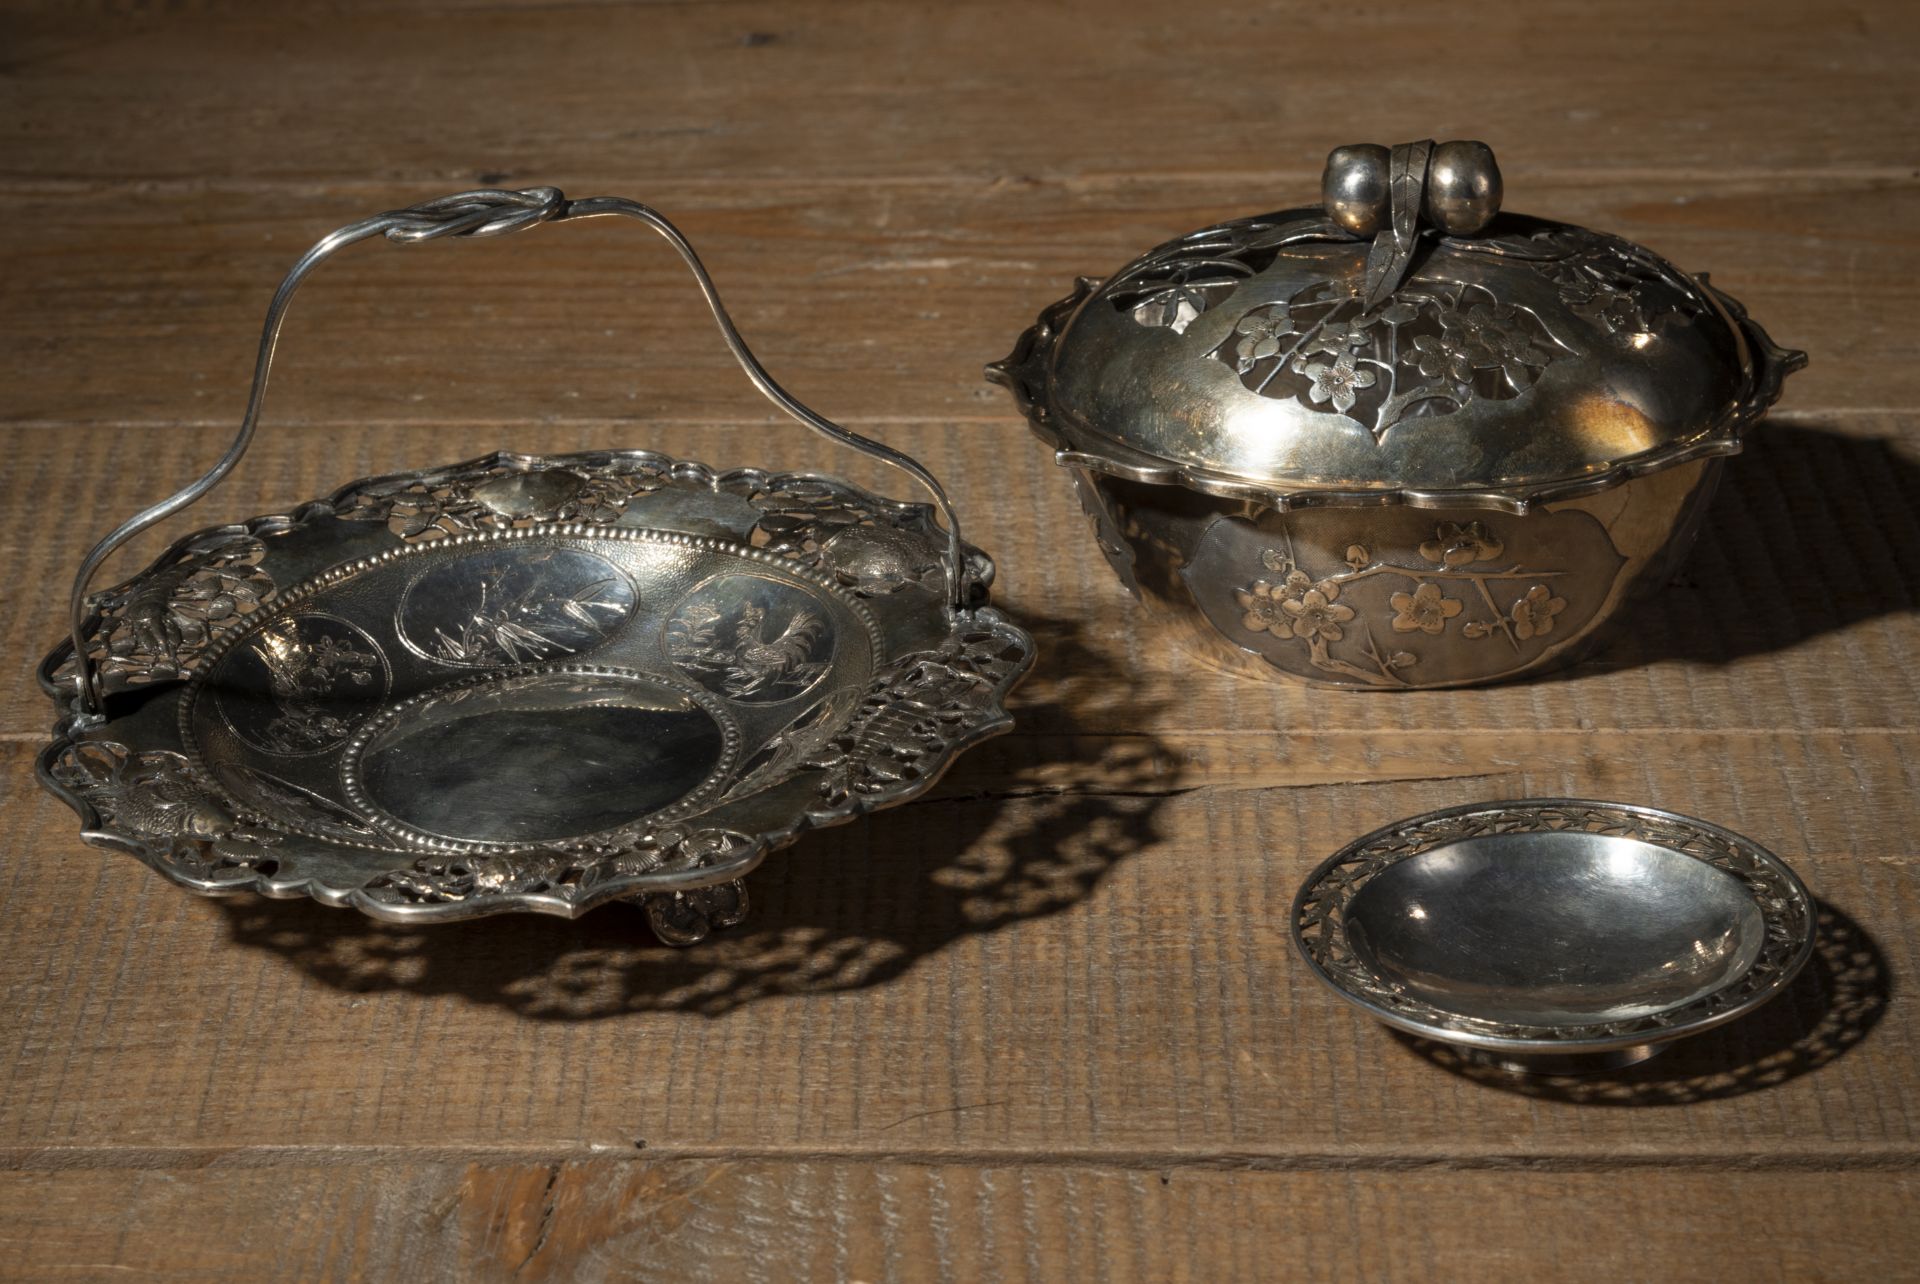 A SILVER COVERED BOWL, A BOWL WITH HANDLE AND A SMALL BOWL WITH FLORAL DECORATION, PARTLY IN OPENWO - Image 2 of 4